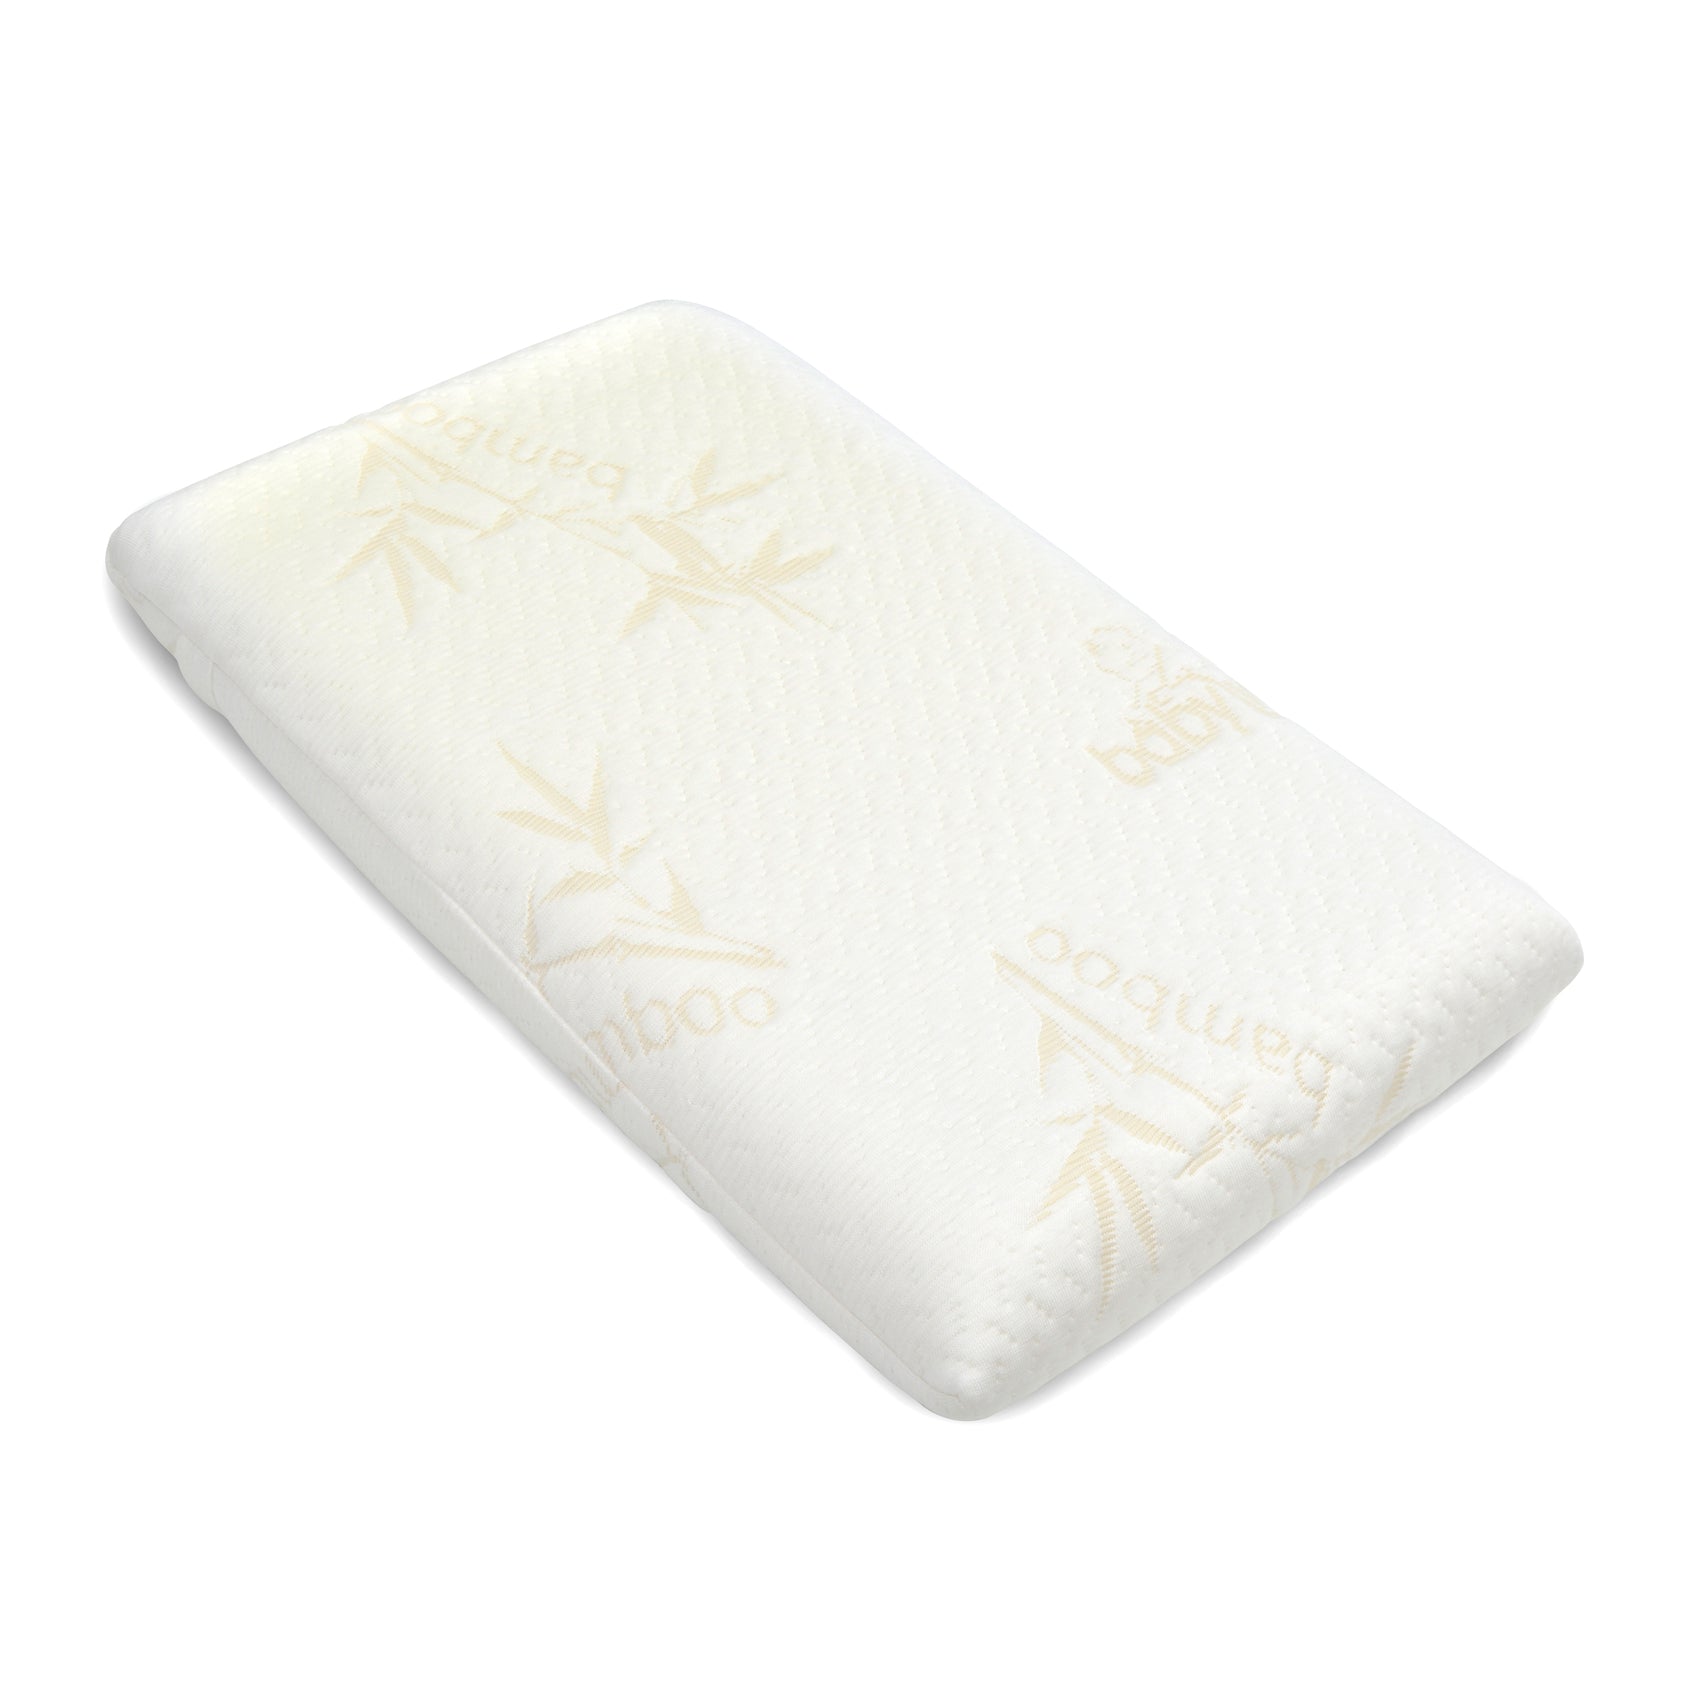 Baby Works - Baby's 1st Pillow With Bamboo Pillowcase (White)